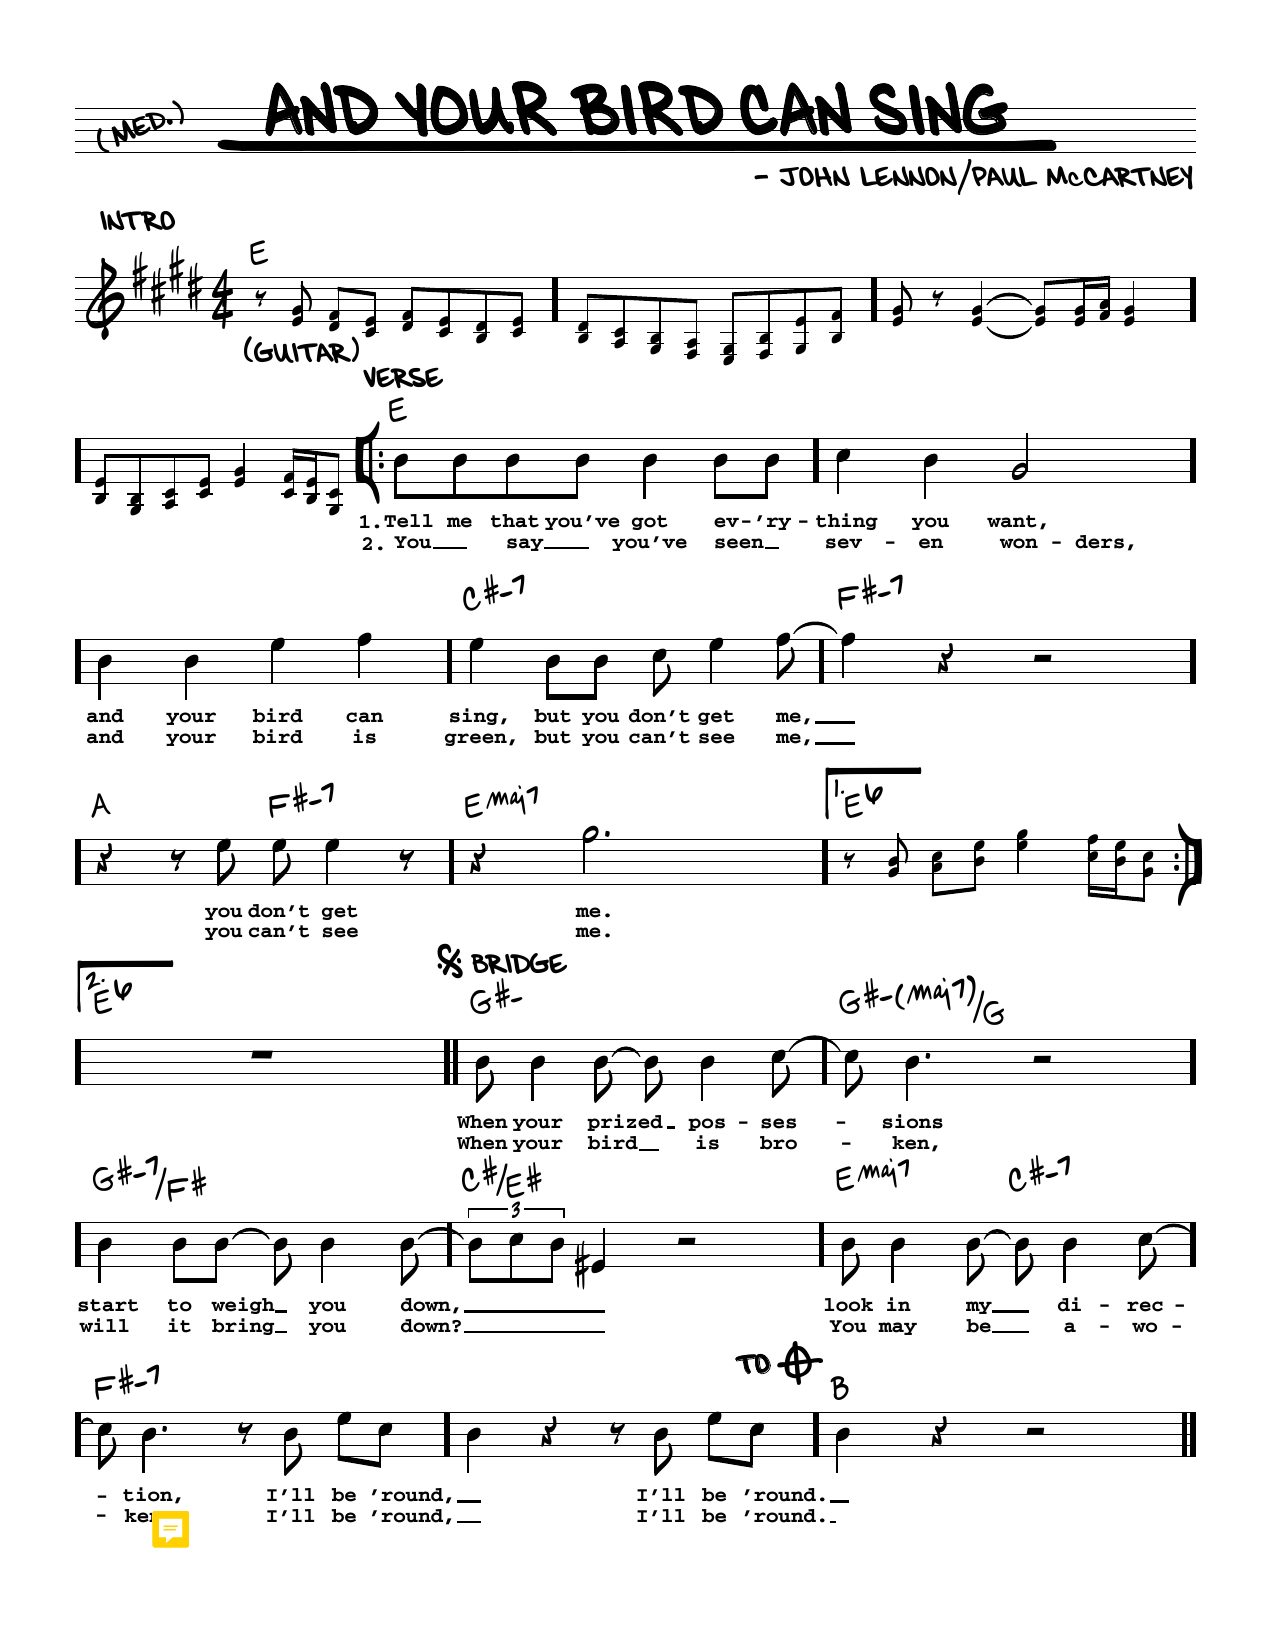 Download The Beatles And Your Bird Can Sing [Jazz version] Sheet Music